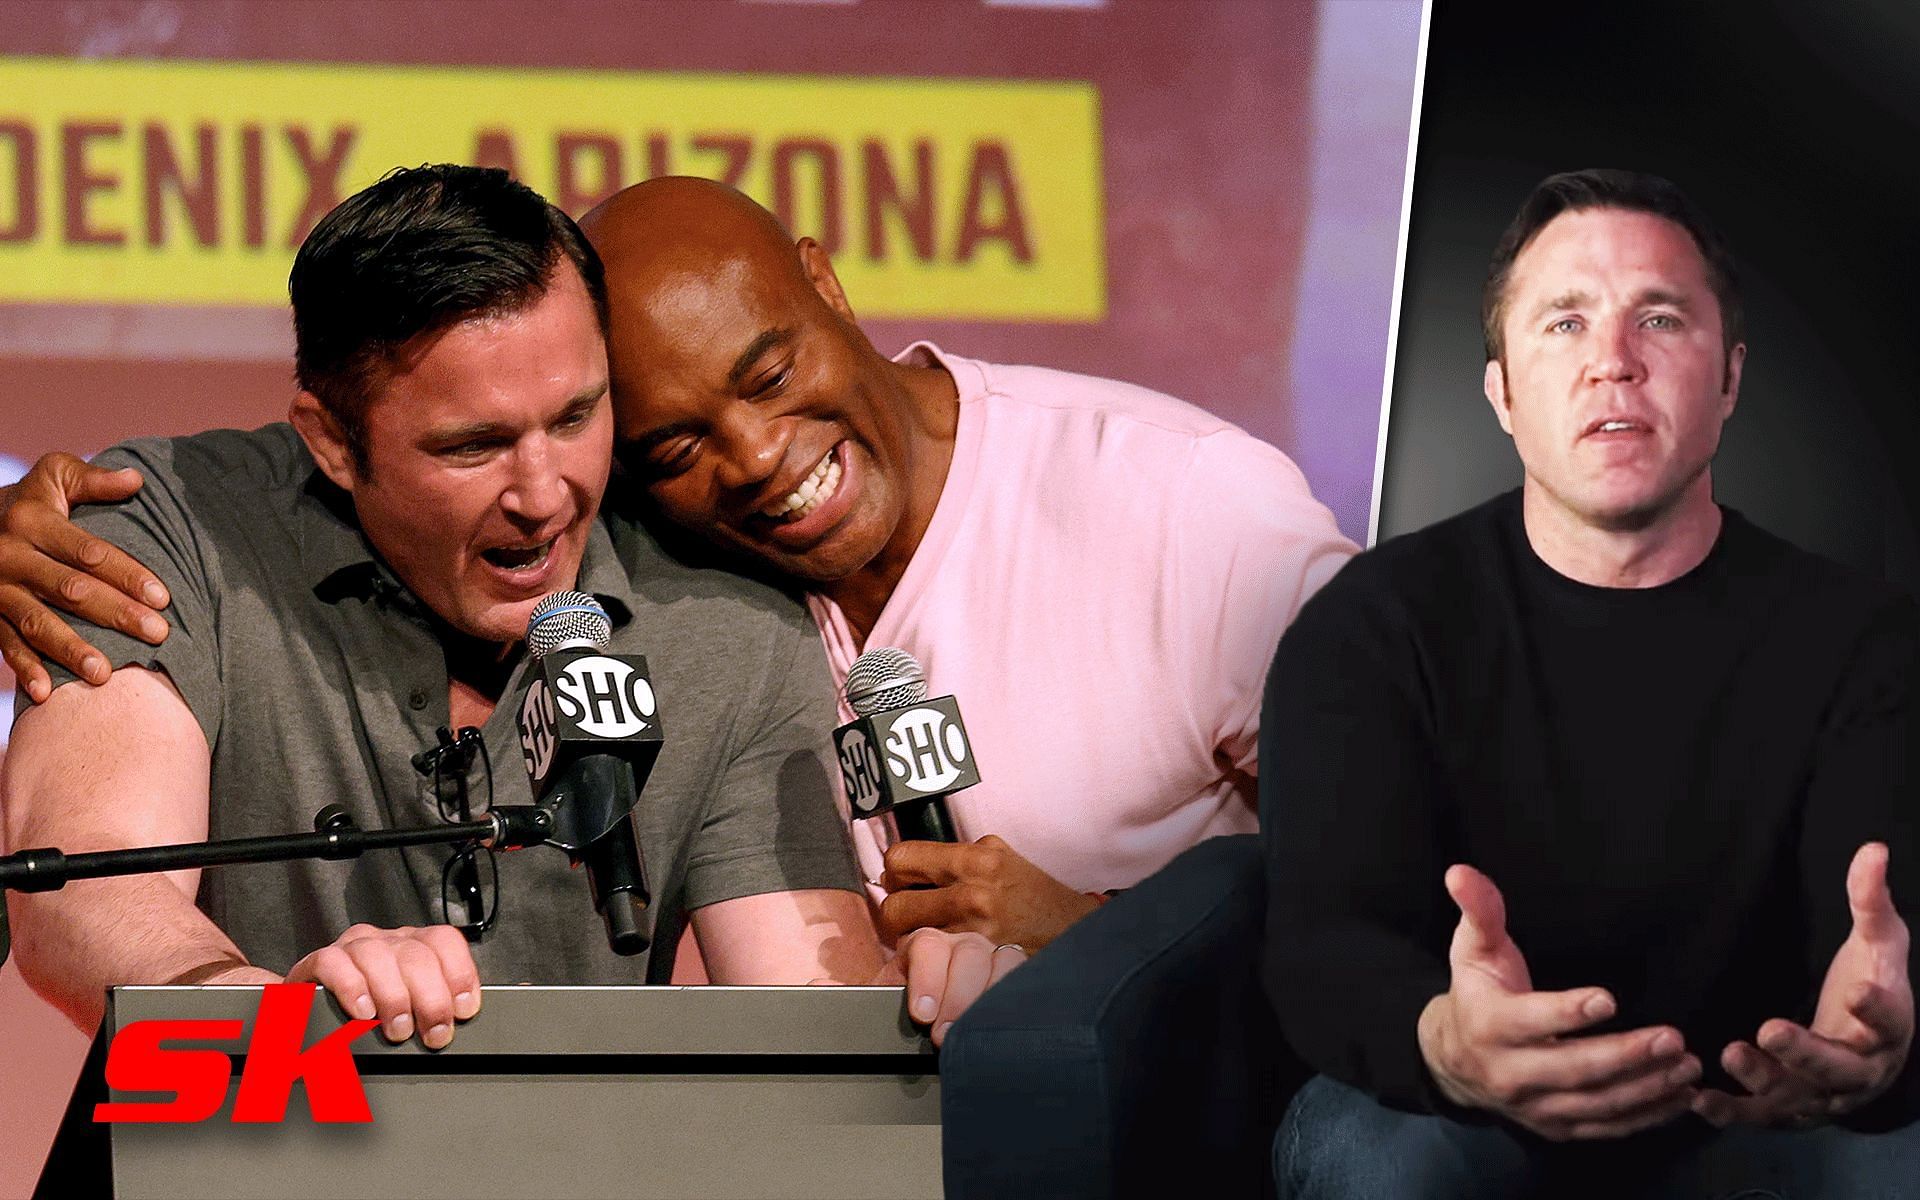 Chael Sonnen and Anderson Silva at the Paul vs. Siva press conference [Images via: Right image via Chael Sonnen | YouTube, rest via Getty]